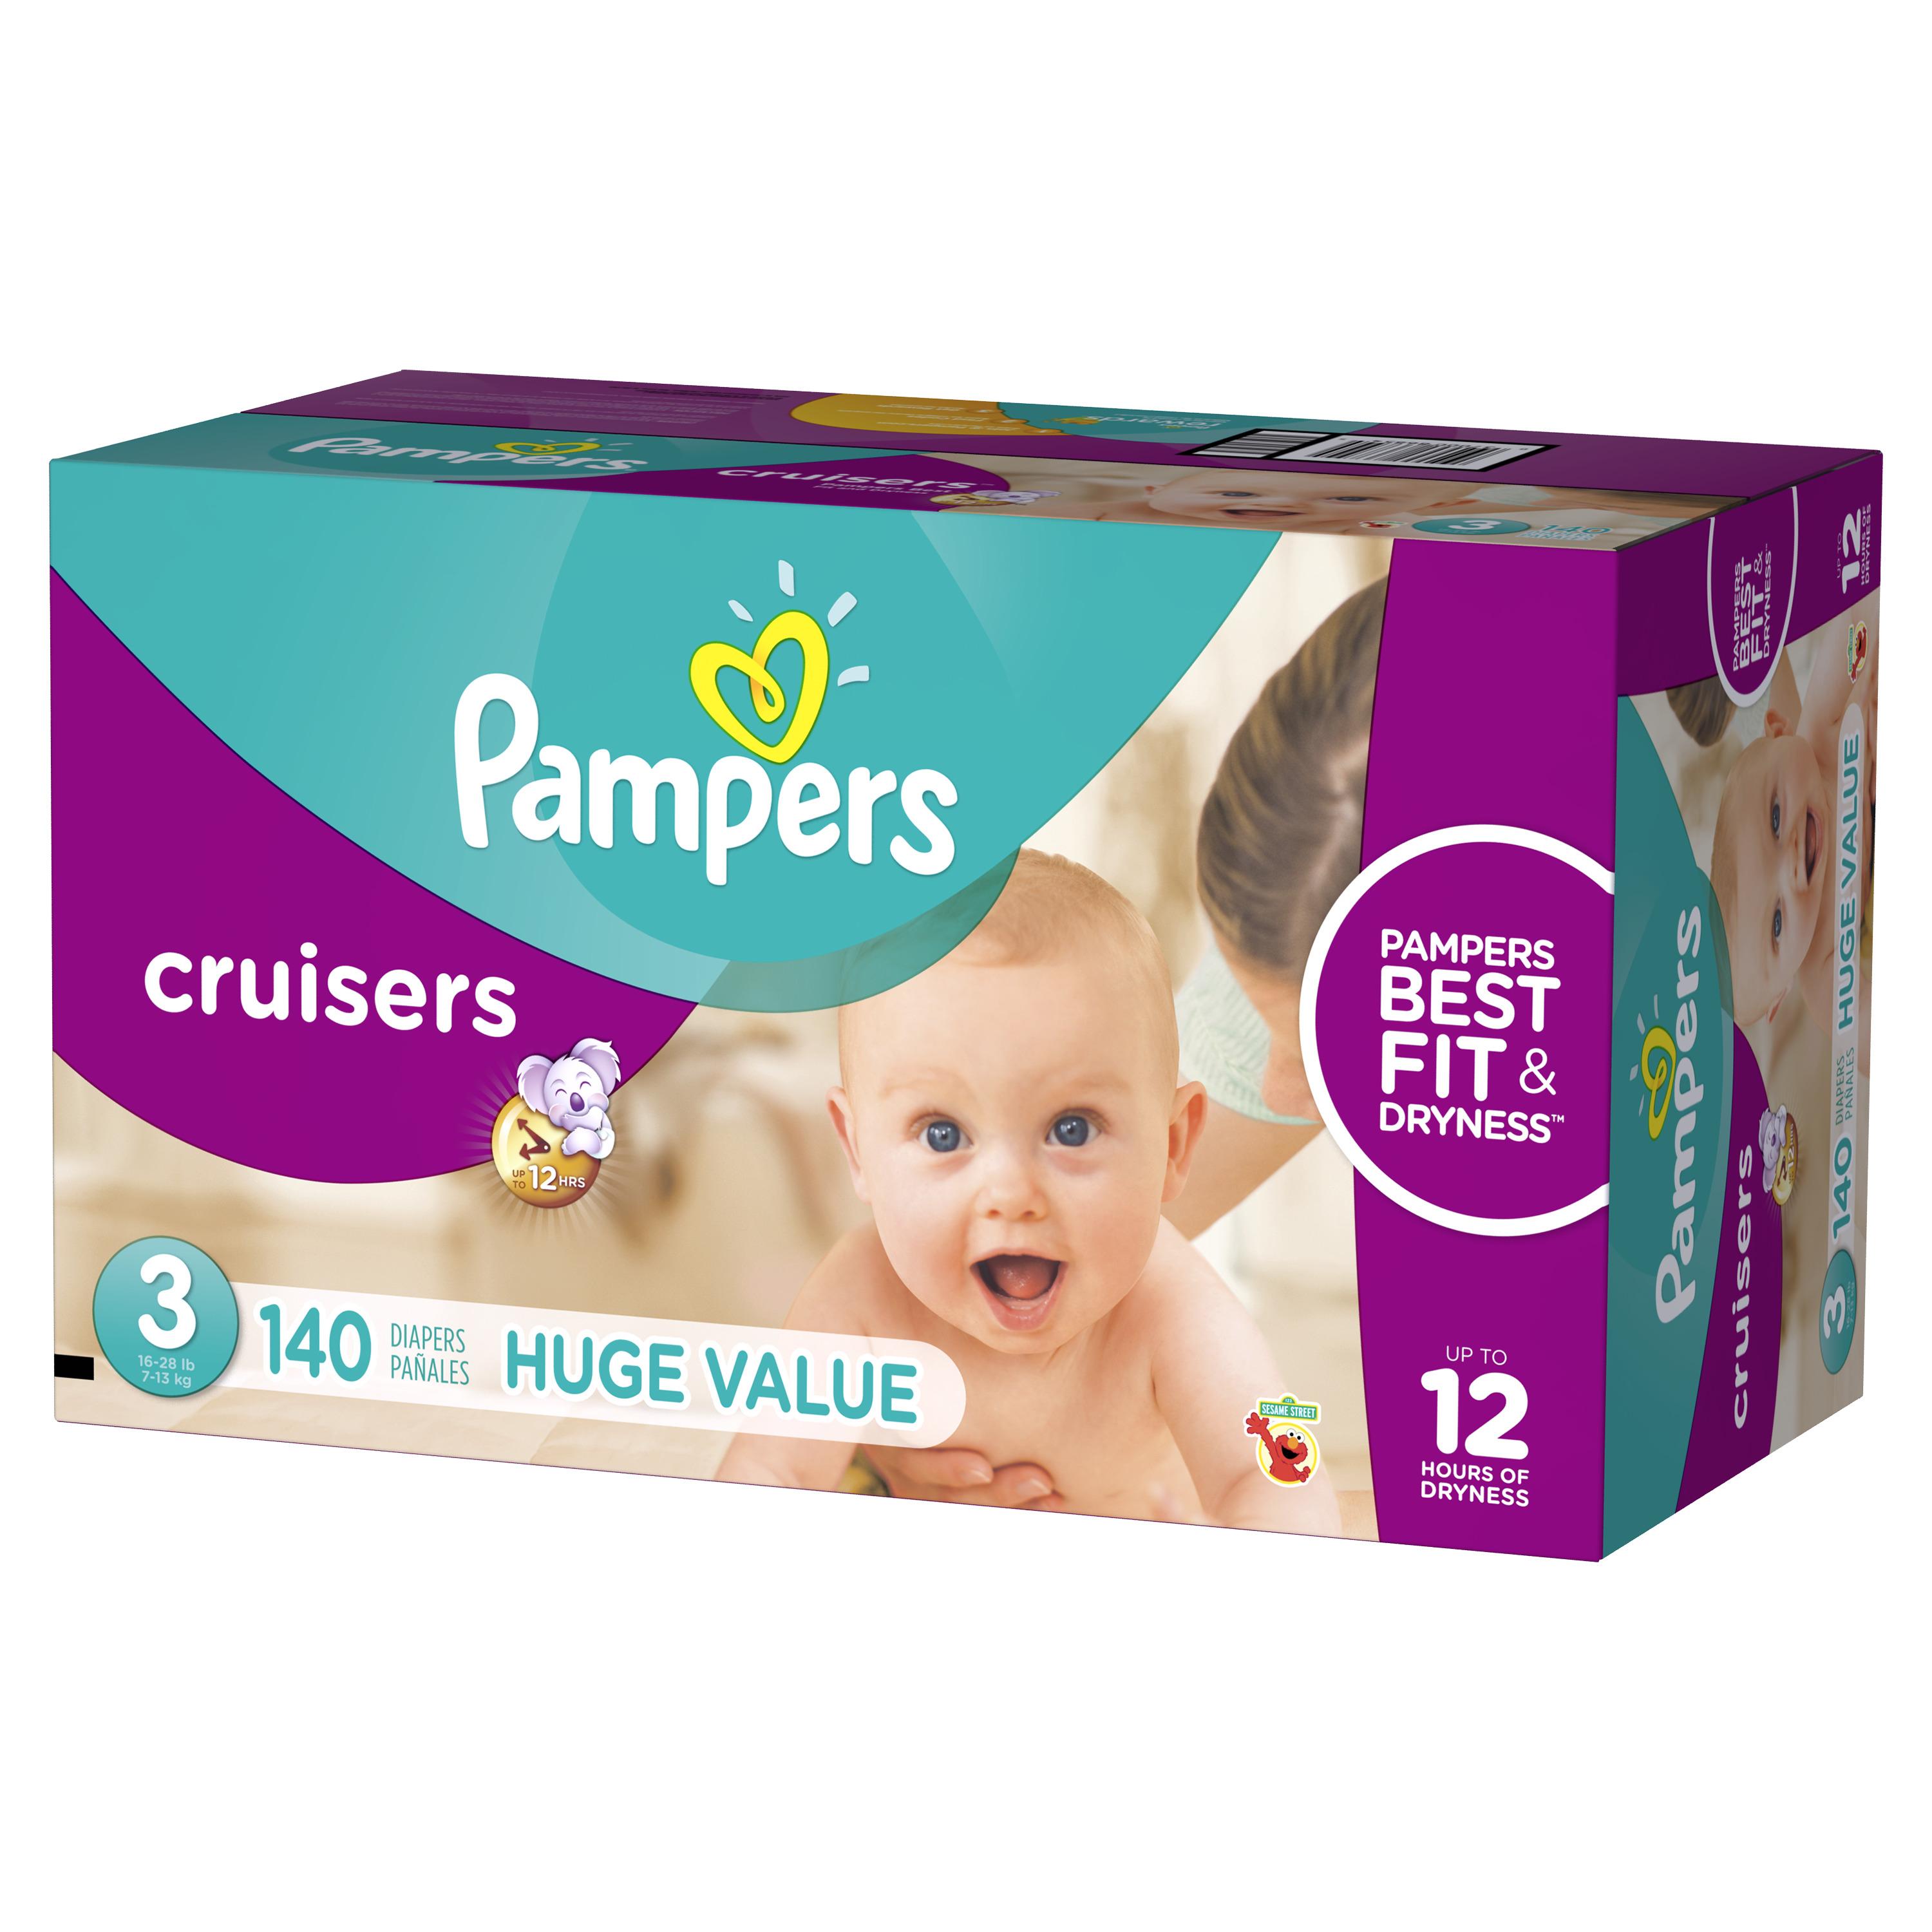 Pampers Cruisers Diapers Size 3 140 count - image 1 of 10